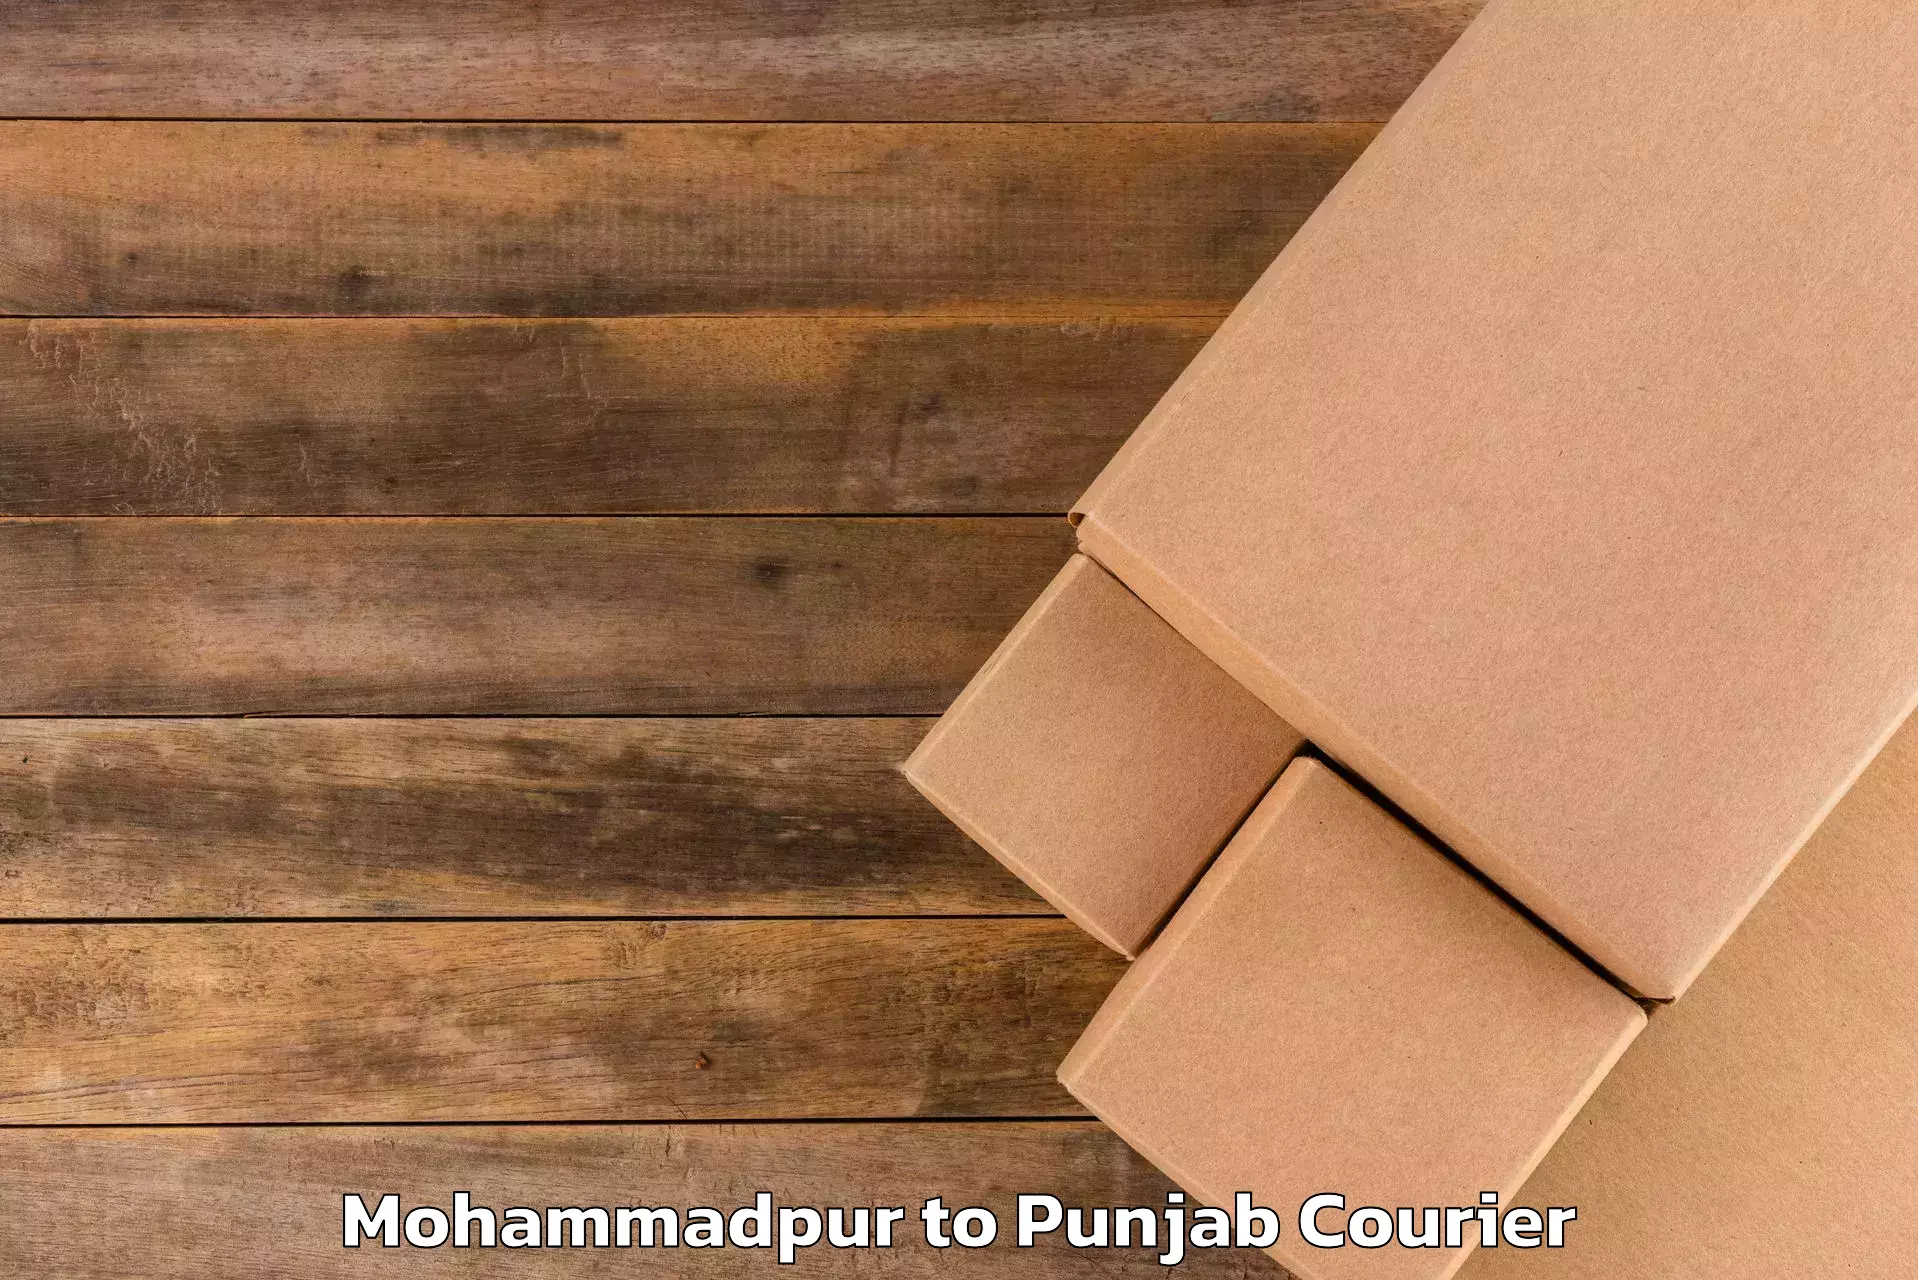 Luggage delivery app Mohammadpur to Fatehgarh Sahib